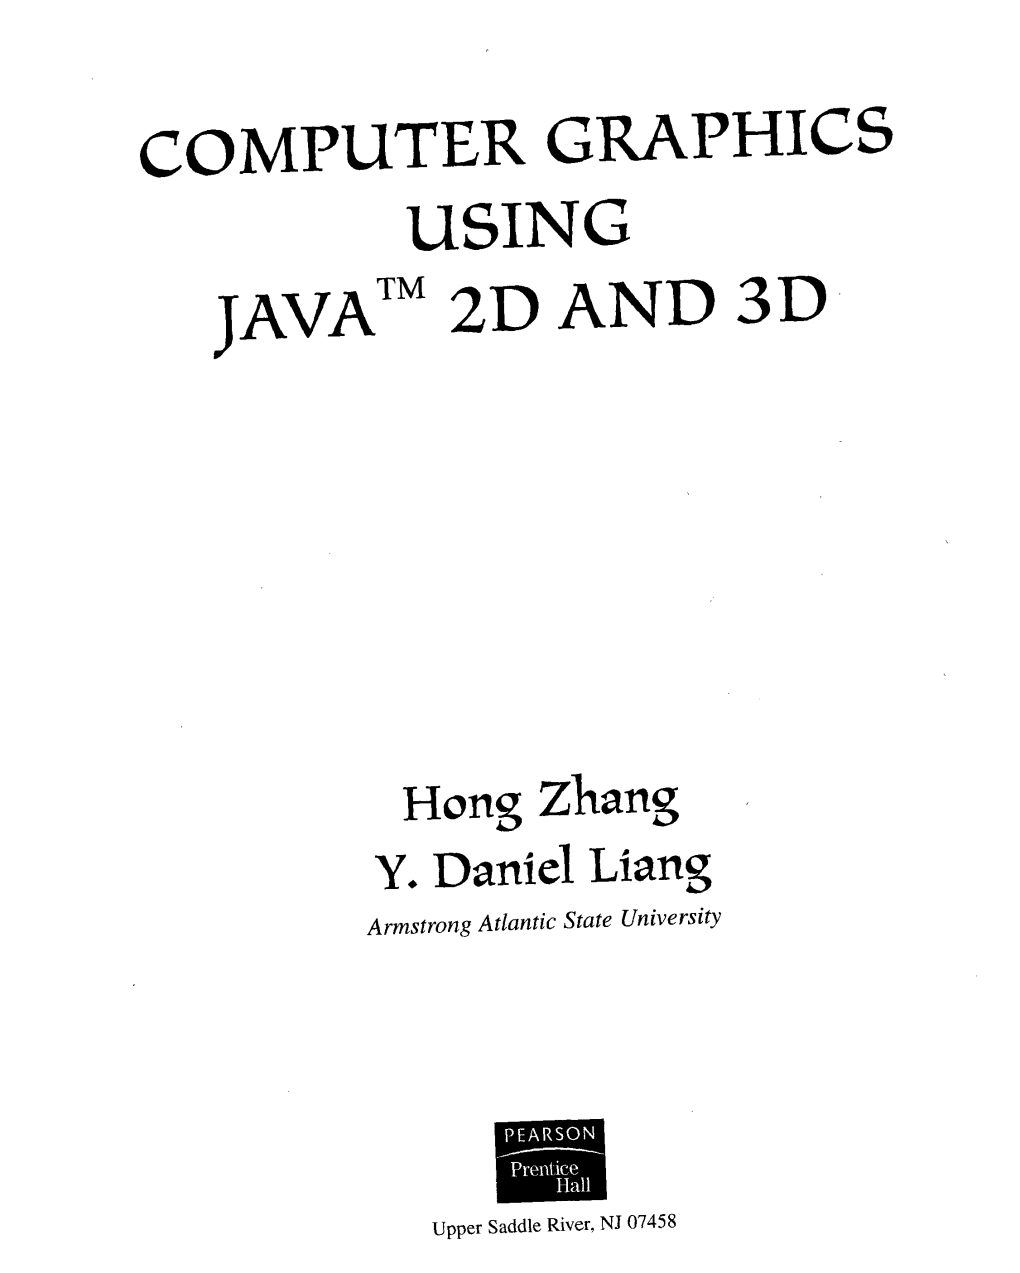 Computer Graphics Using Java™ 2D and 3D